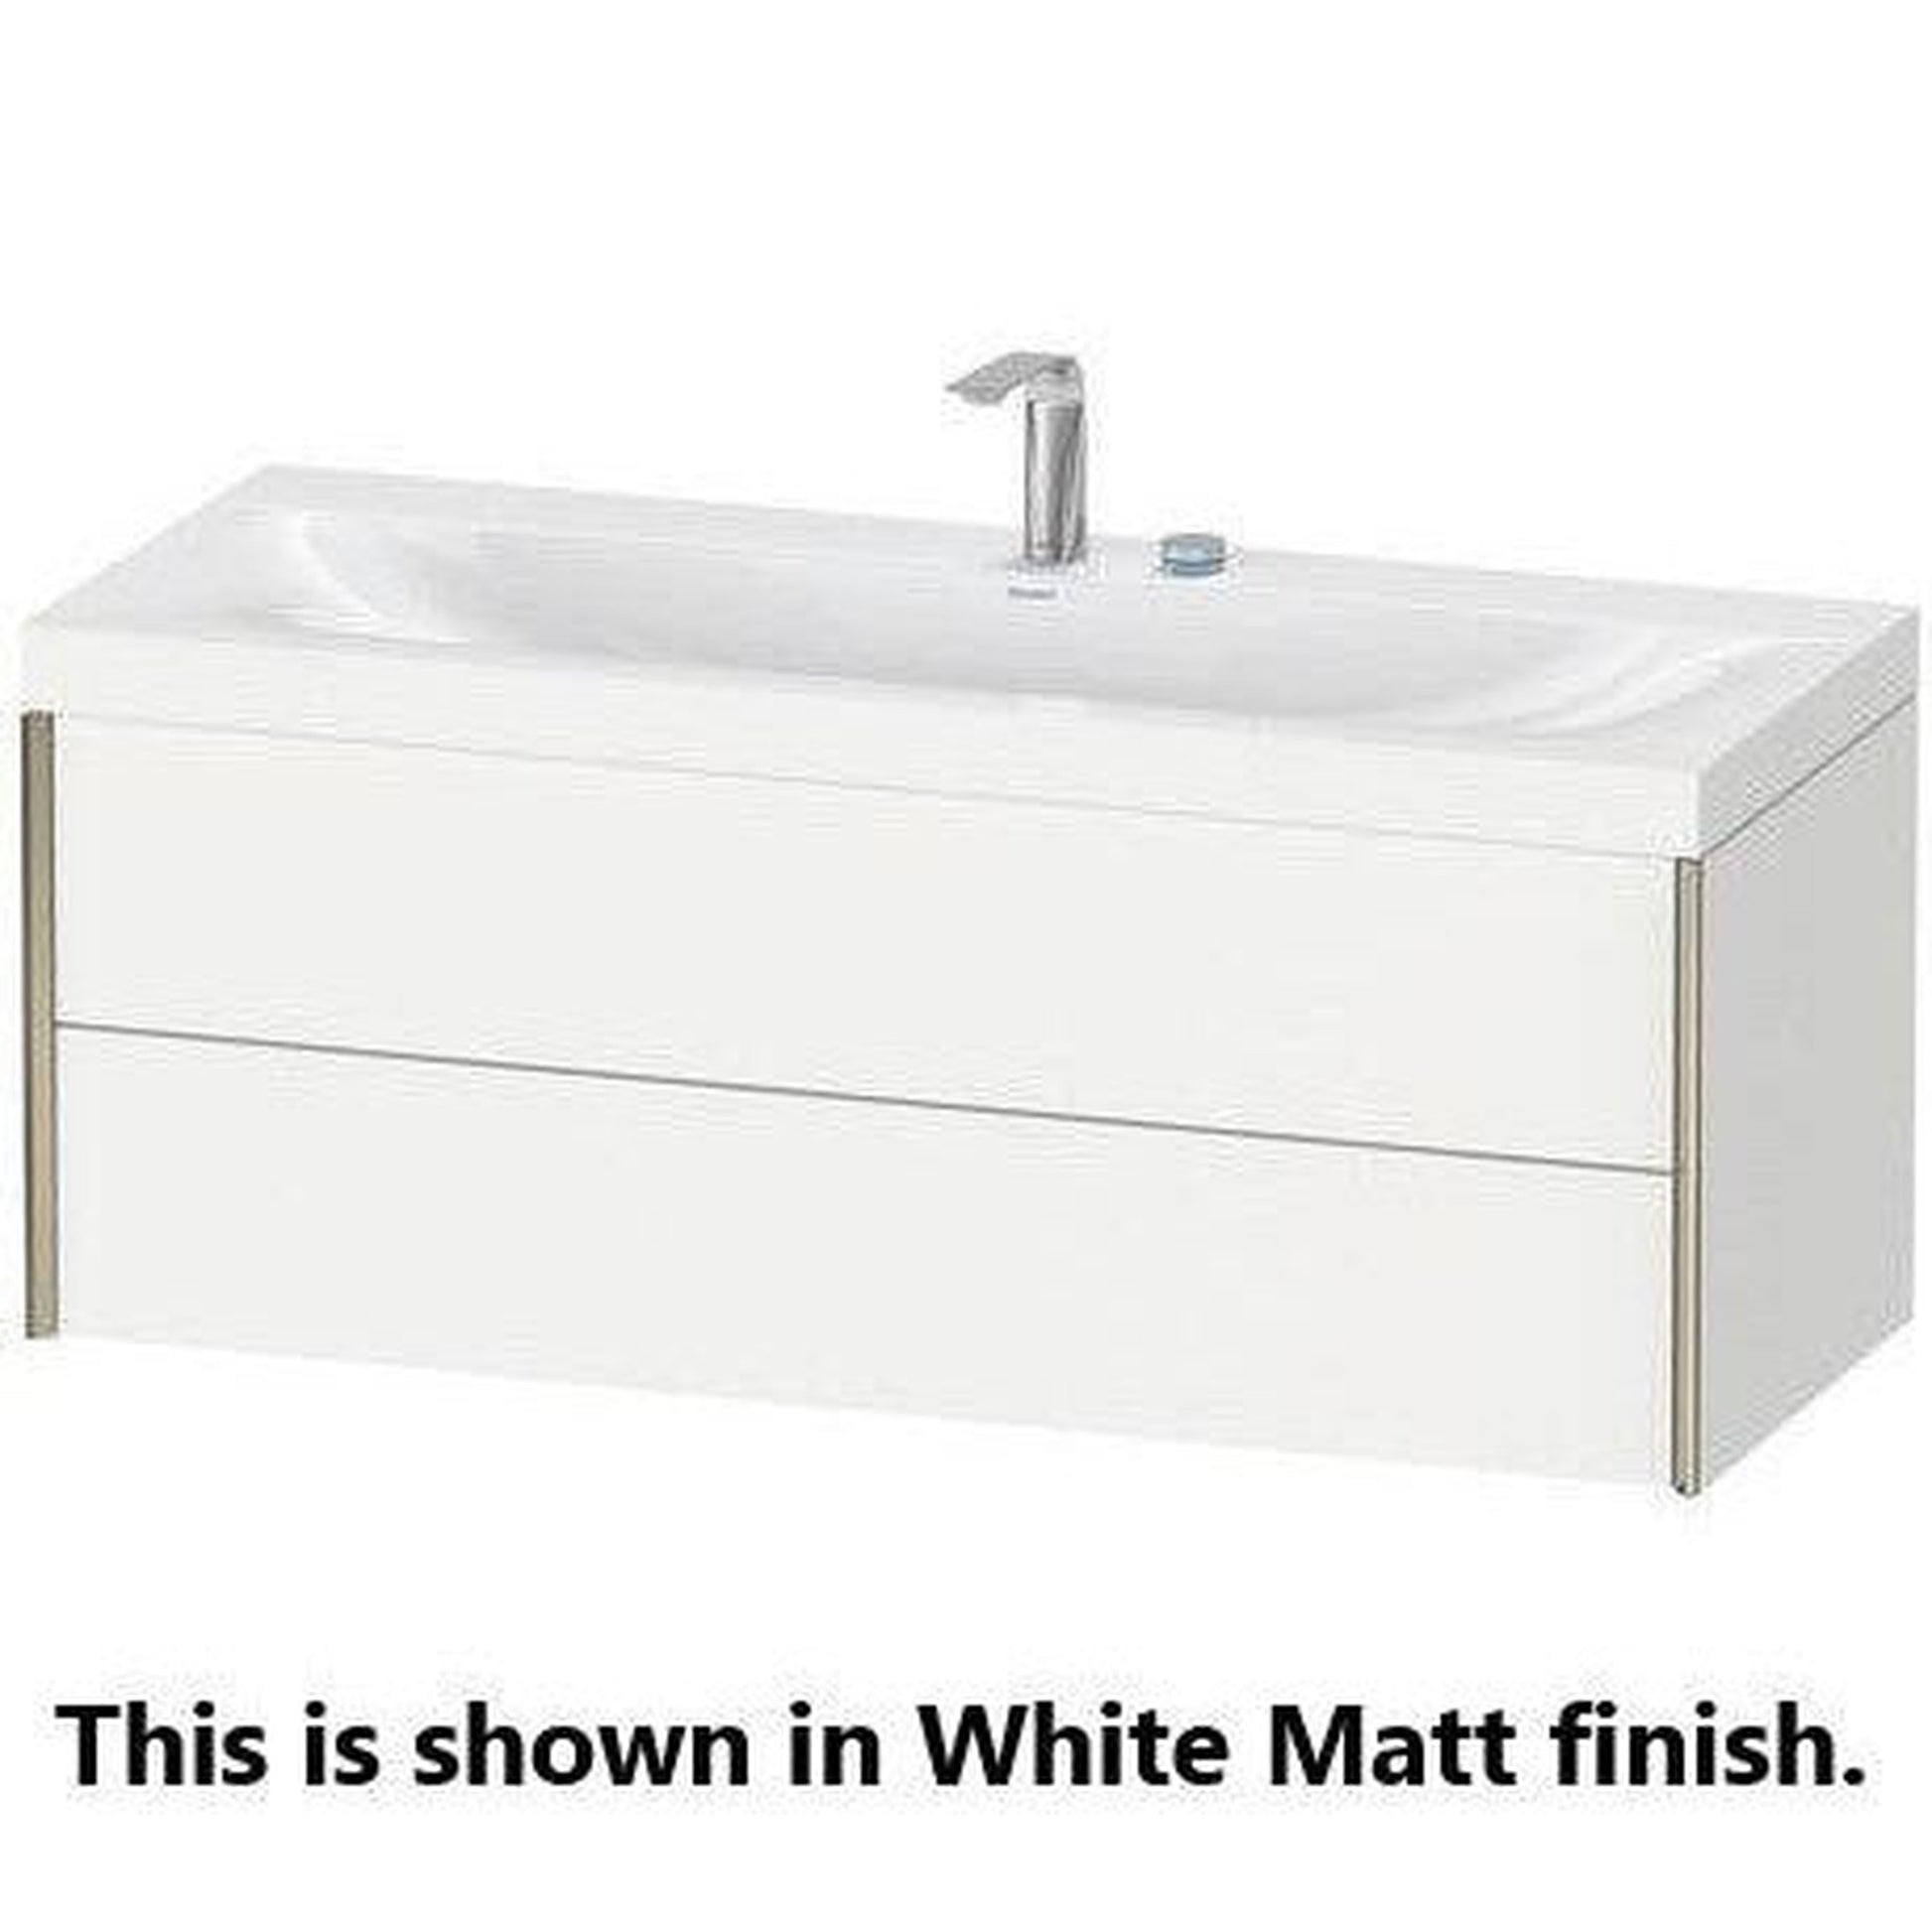 Duravit Xviu 47" x 20" x 19" Two Drawer C-Bonded Wall-Mount Vanity Kit With Two Tap Holes, Silver Pine (XV4617EB131C)